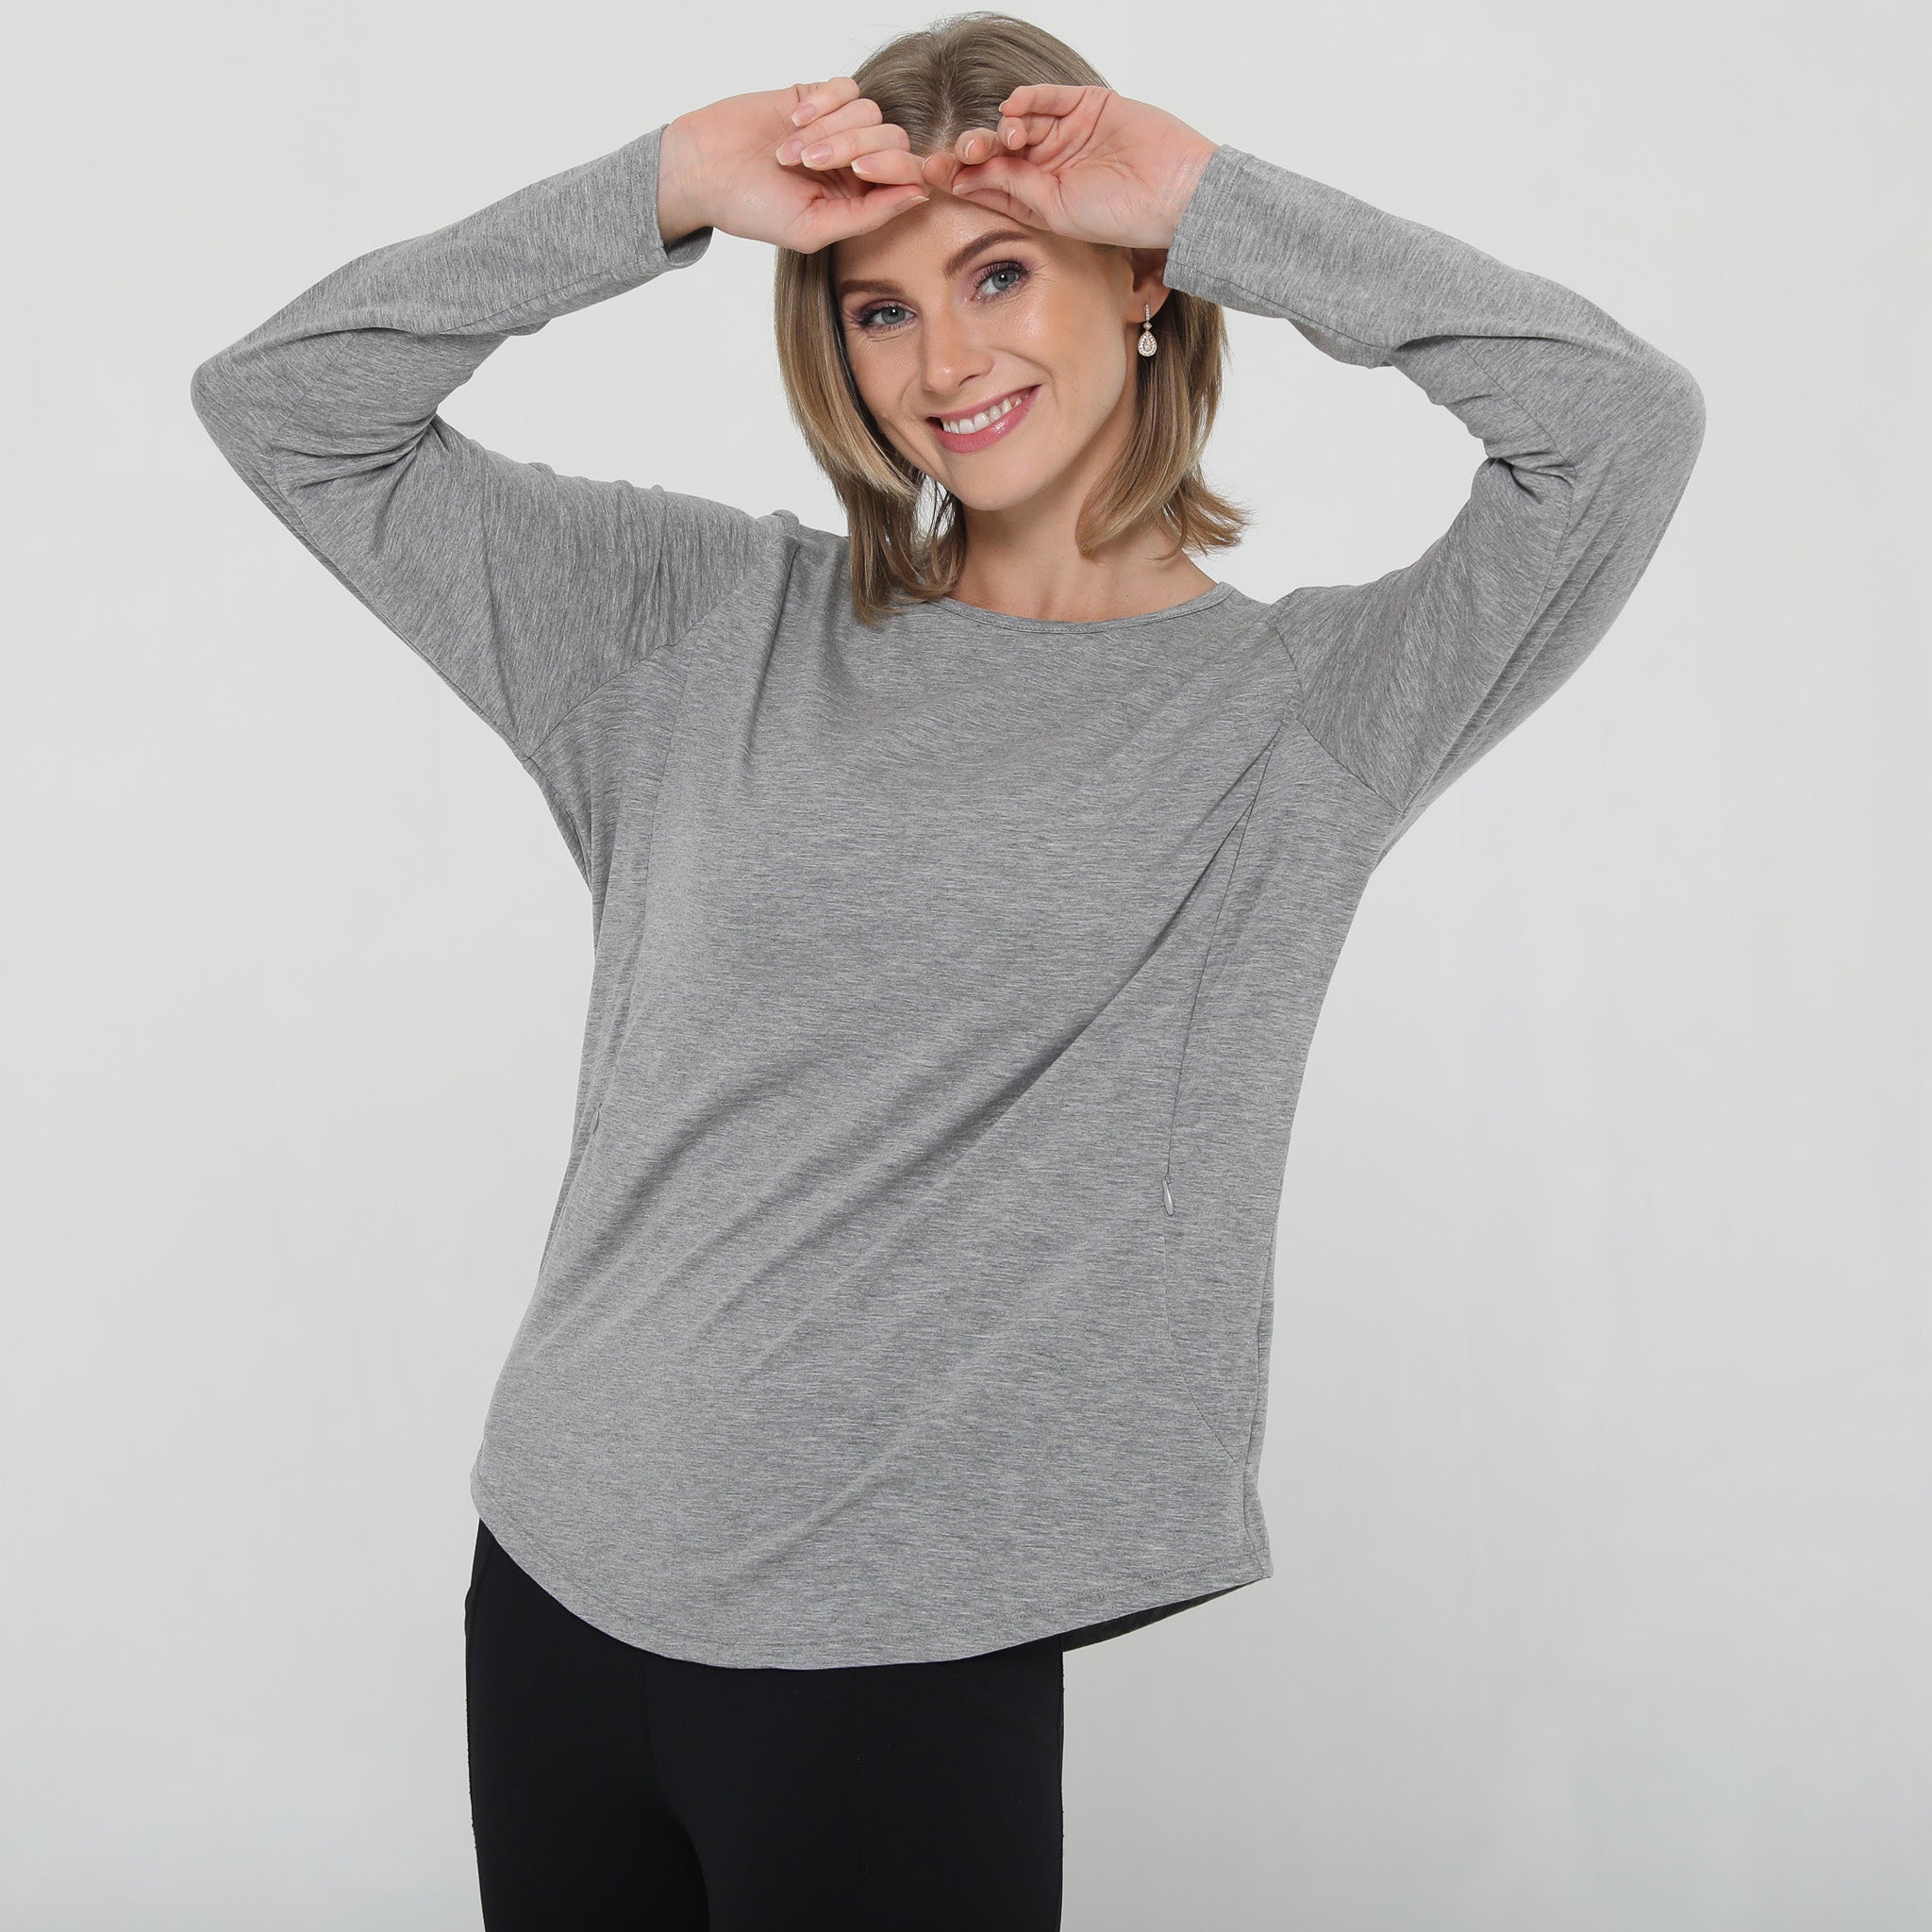 Sweat and Milk LLC: Last Few Hours to Save 20% Sitewide + Free Nursing Top  on $120